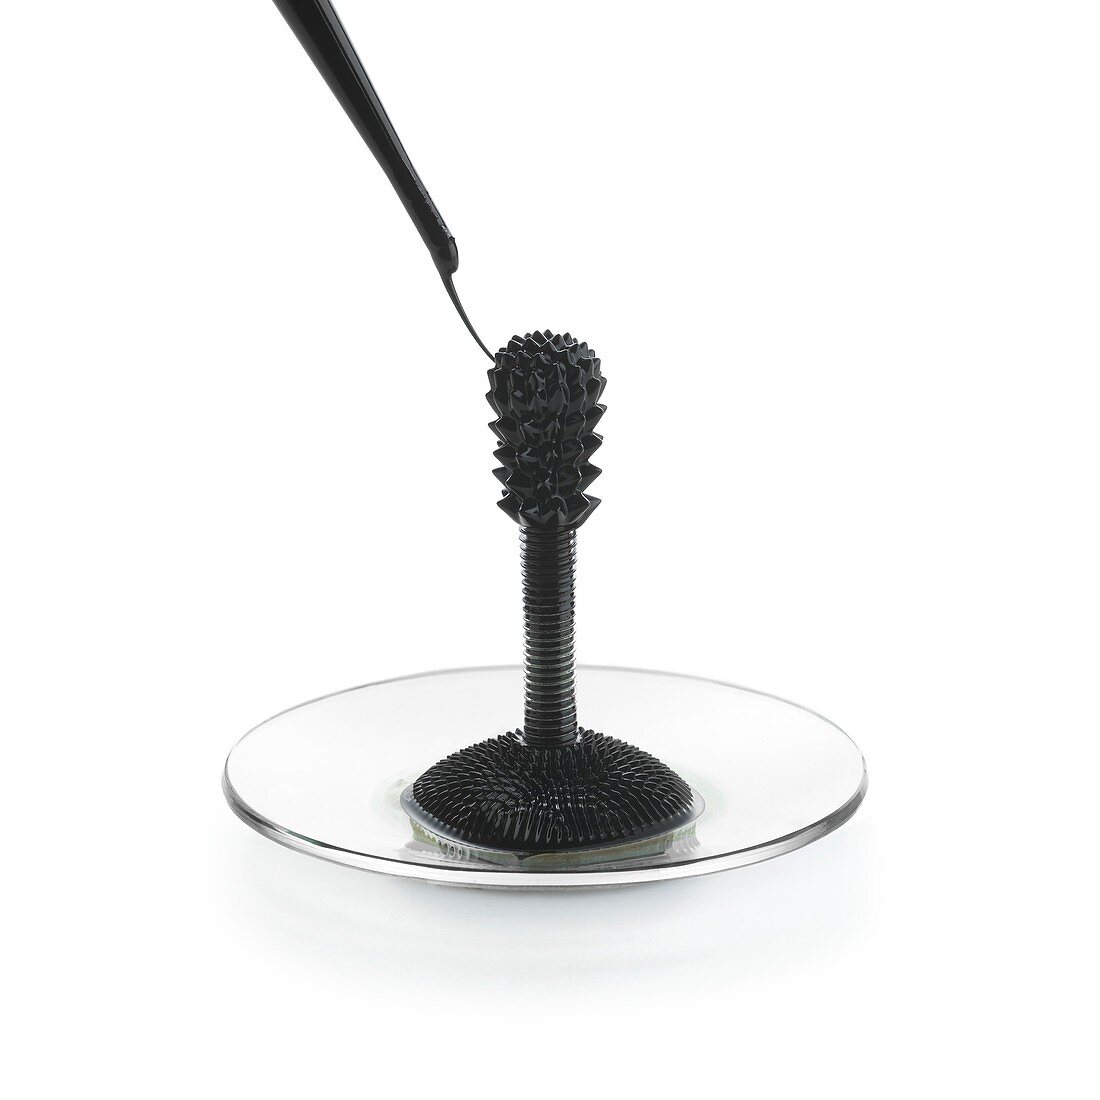 Ferrofluid and bolt in a magnetic field